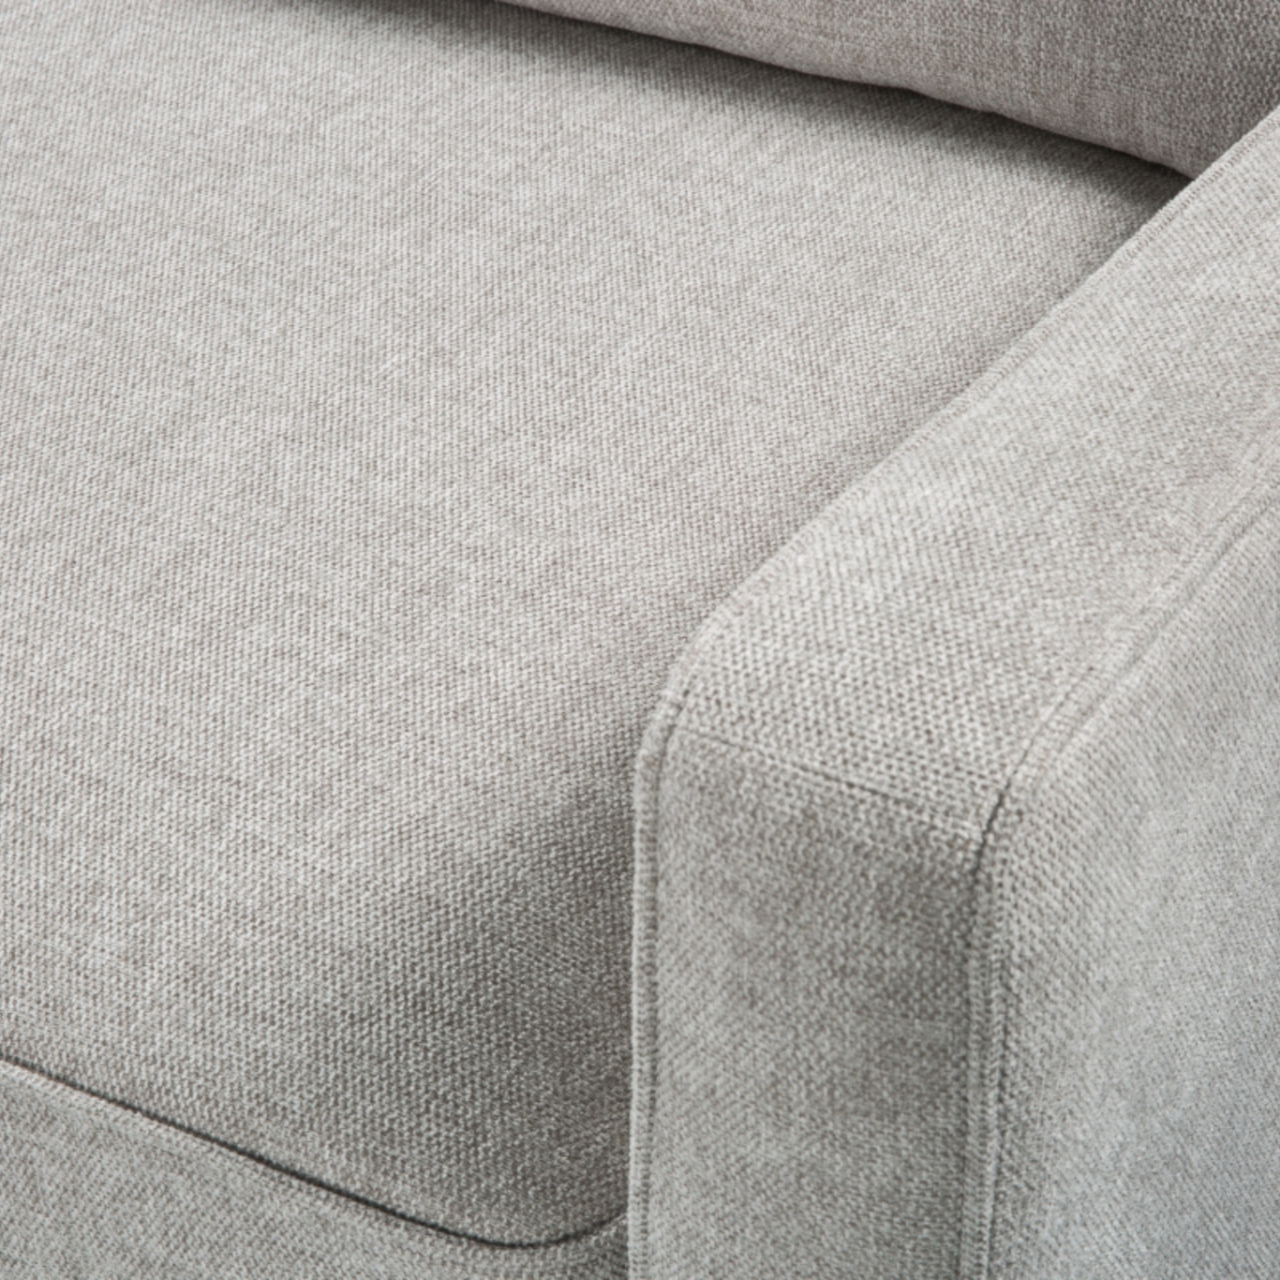 detail of simple, modern 2.5 seater sofa upholstered  in stone linen